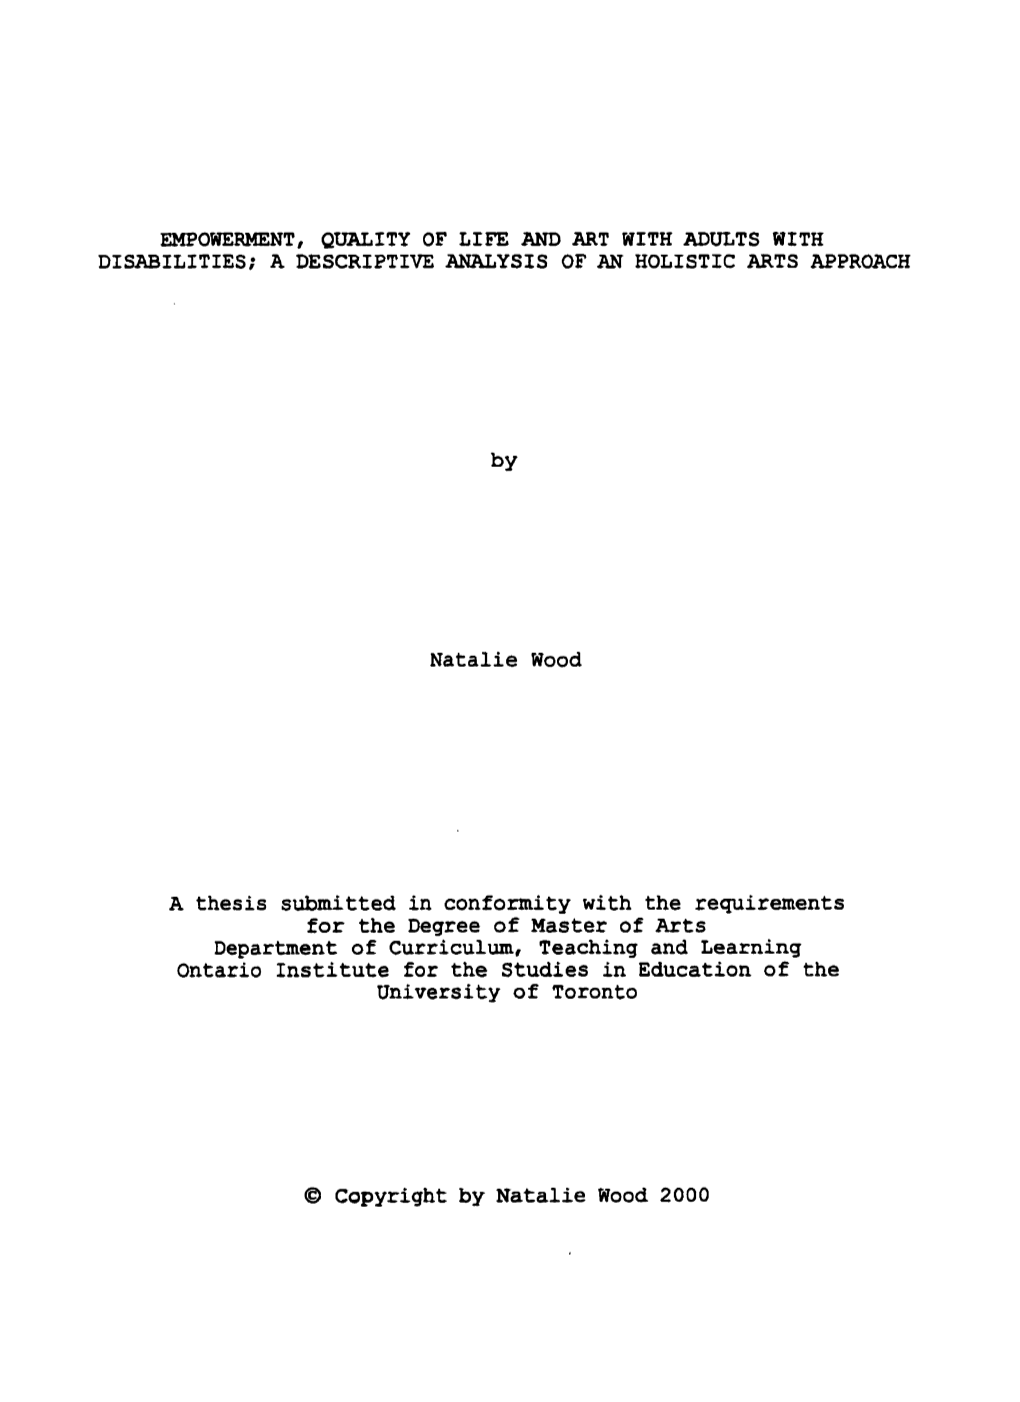 Natalie Wood a Thesis Submitted in Conformity with the Requirements For